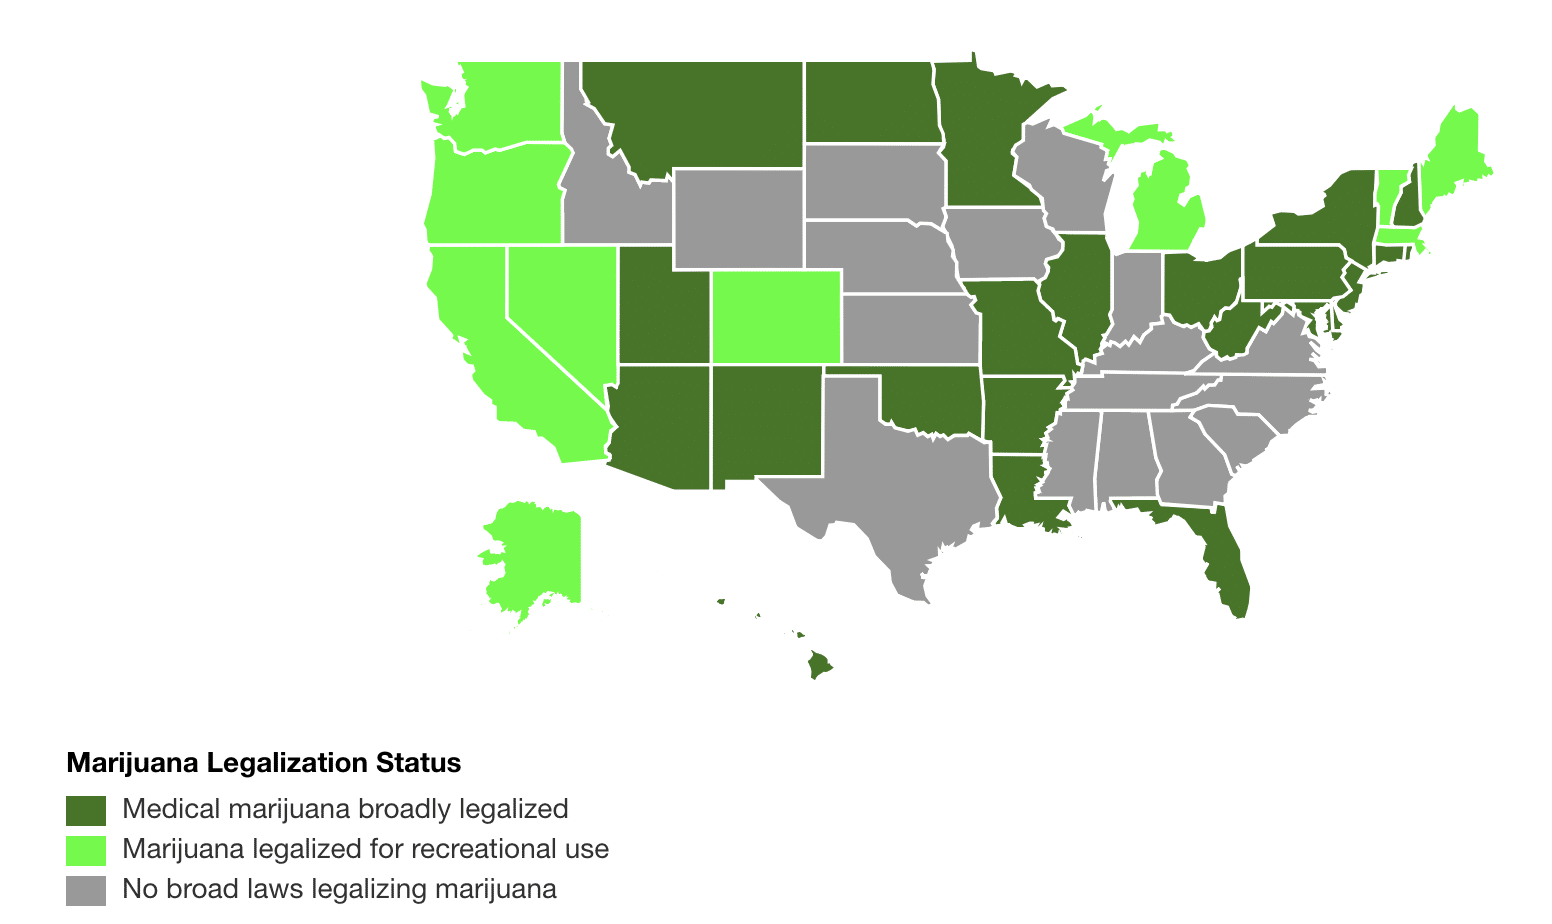 cannabis jobs are available in these states